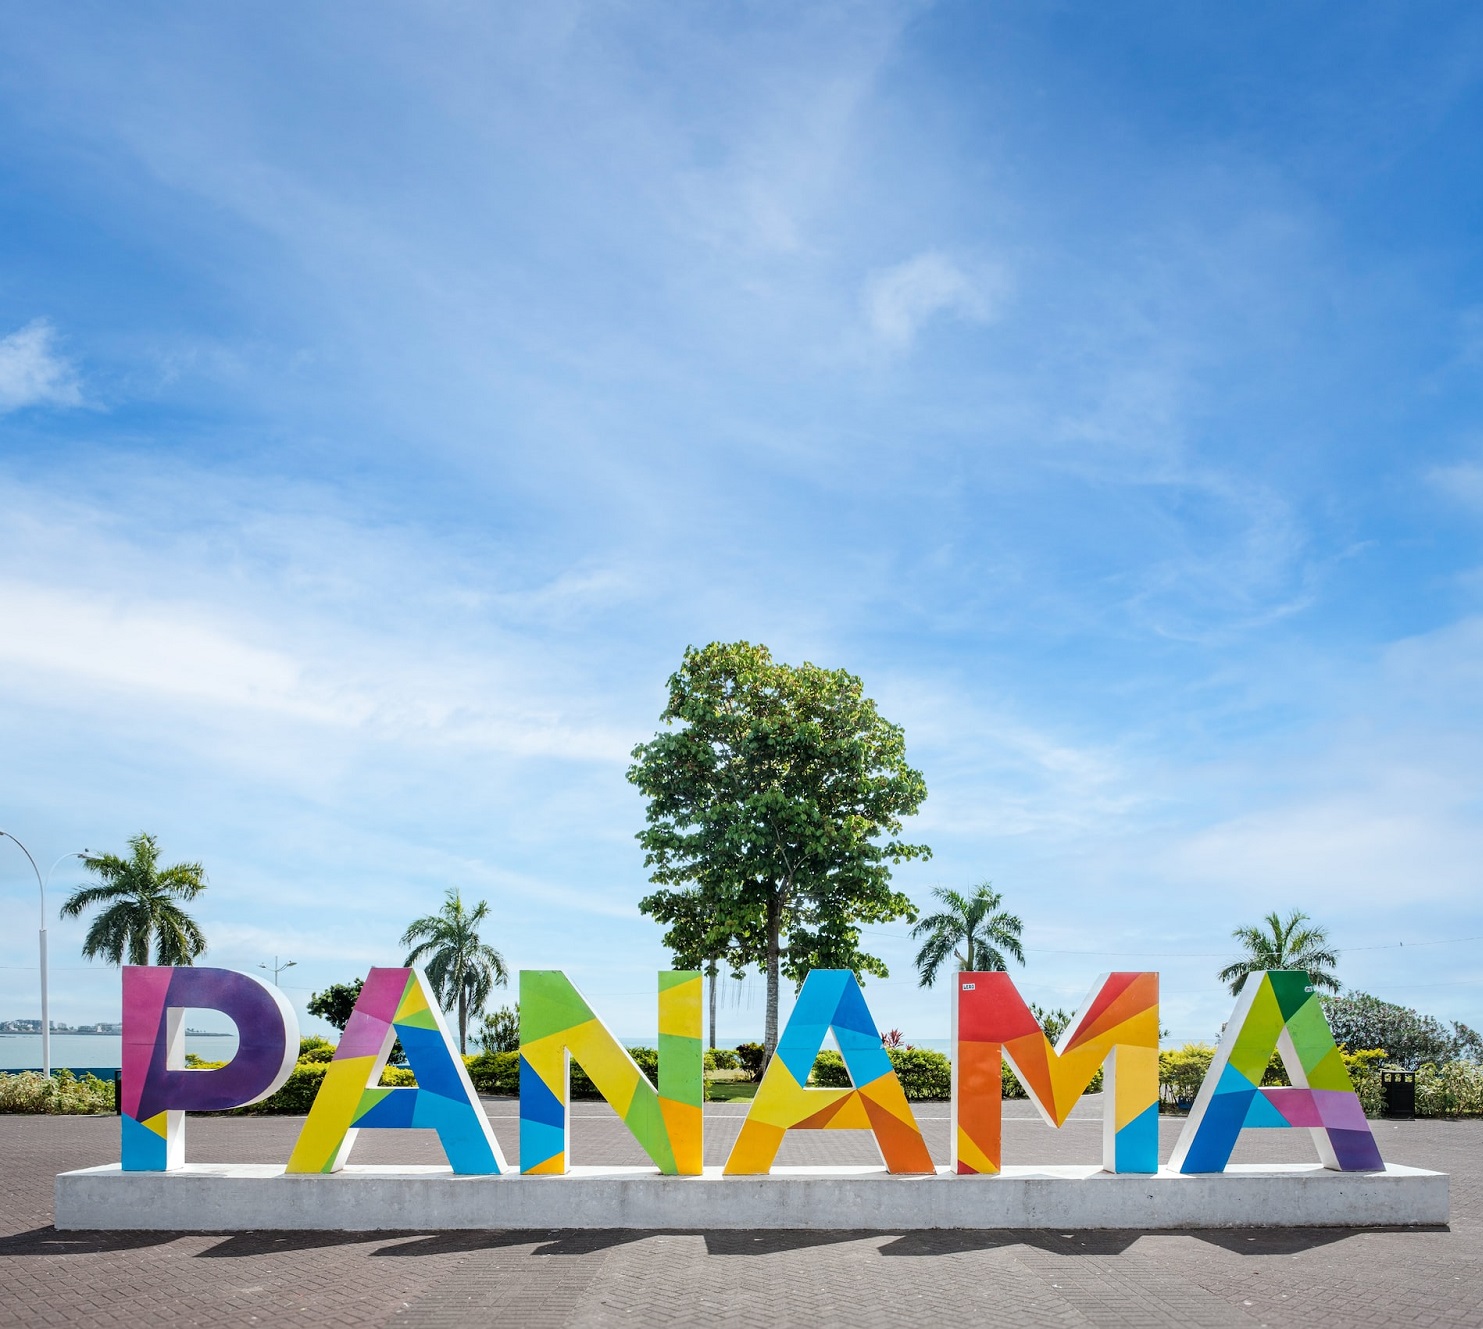 Panama Tours & Holiday Packages